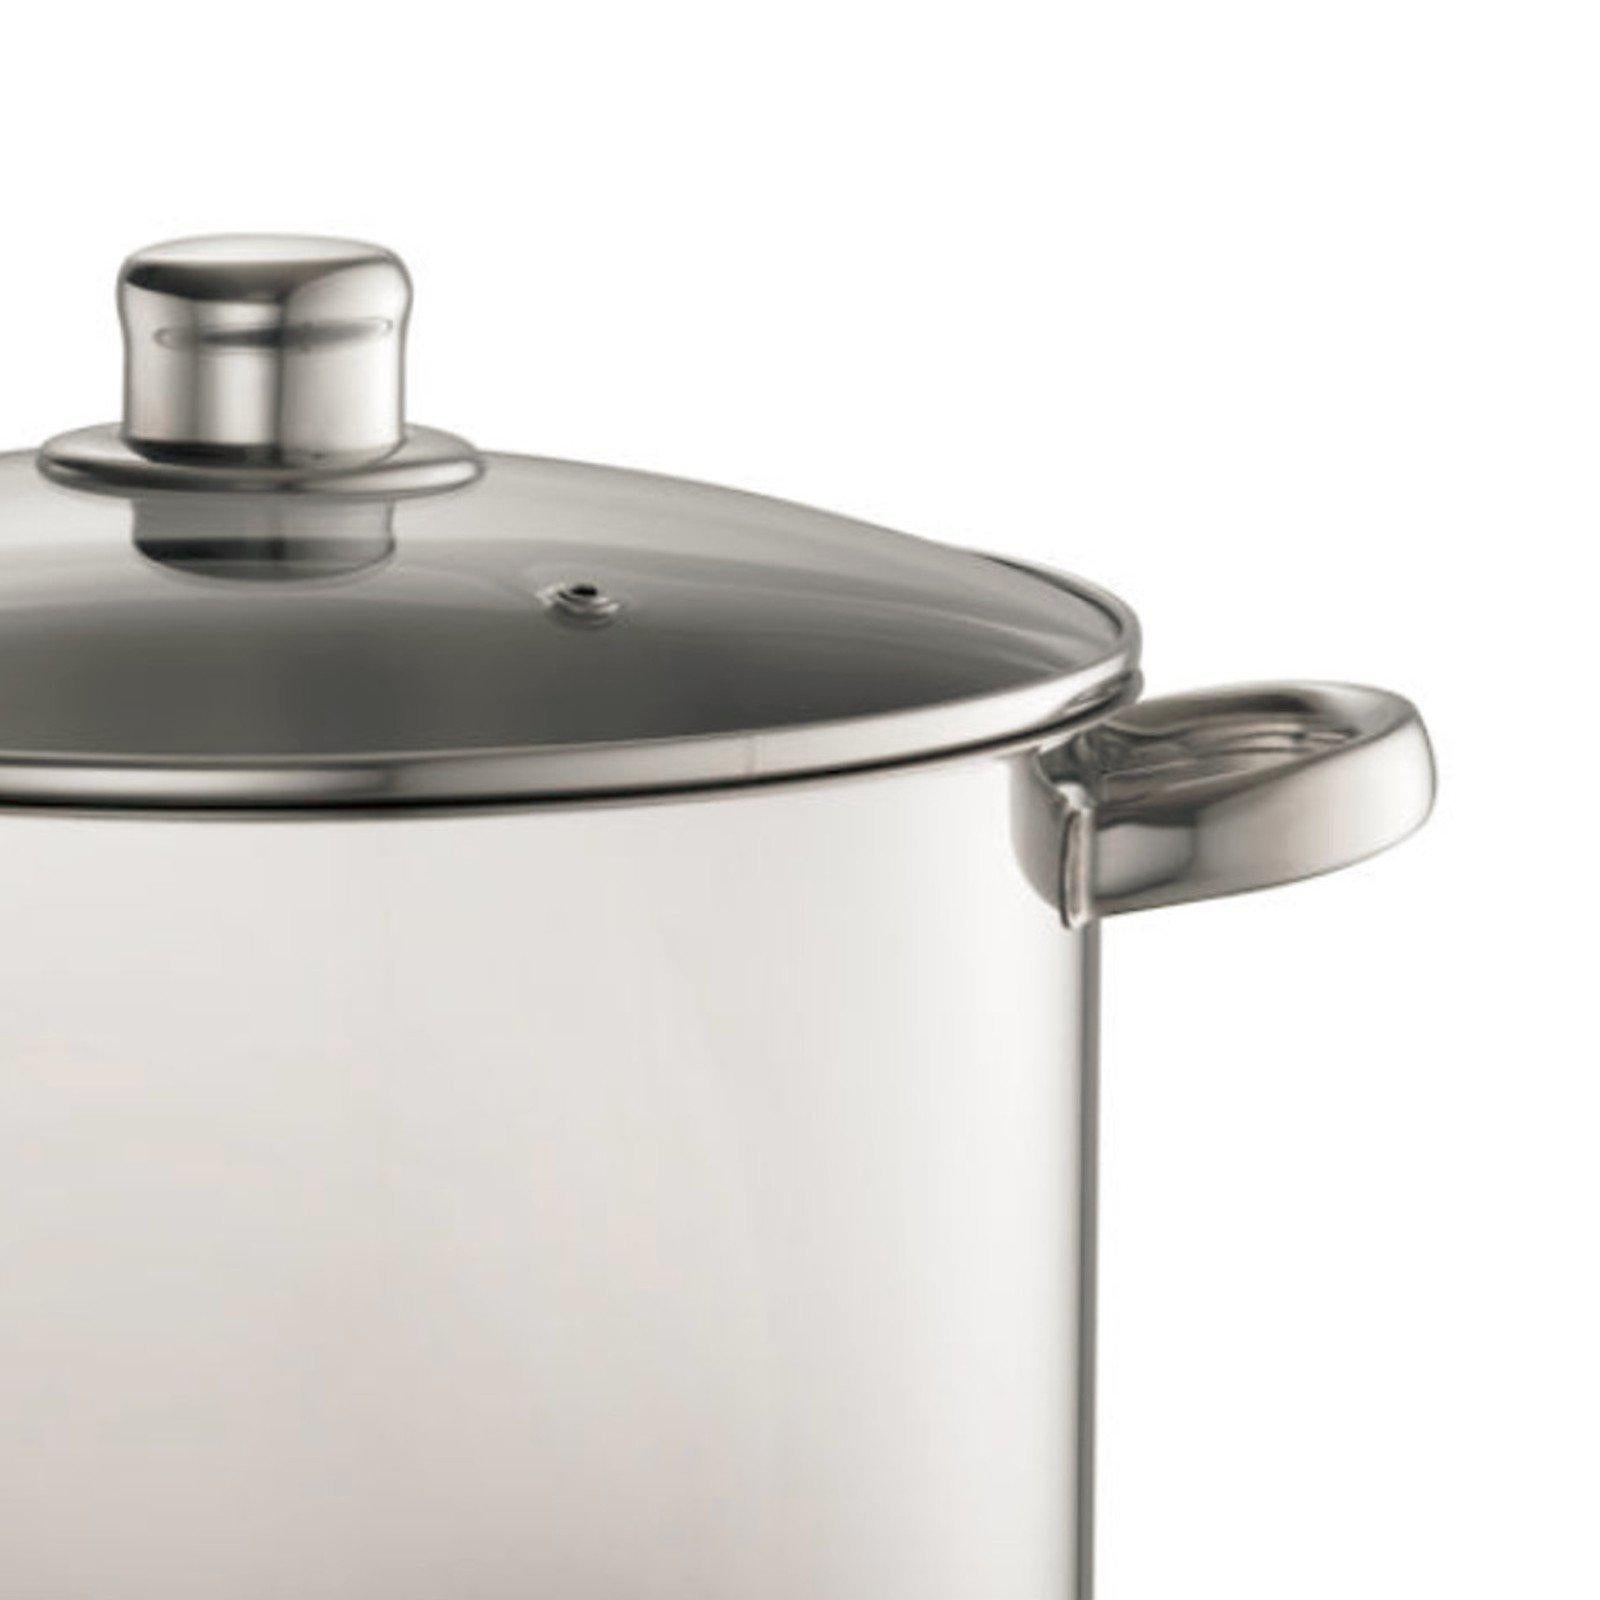 Davis & Waddell 16.5 Litre Stock Pot With Glass Lid-stock pot-Chef's Quality Cookware